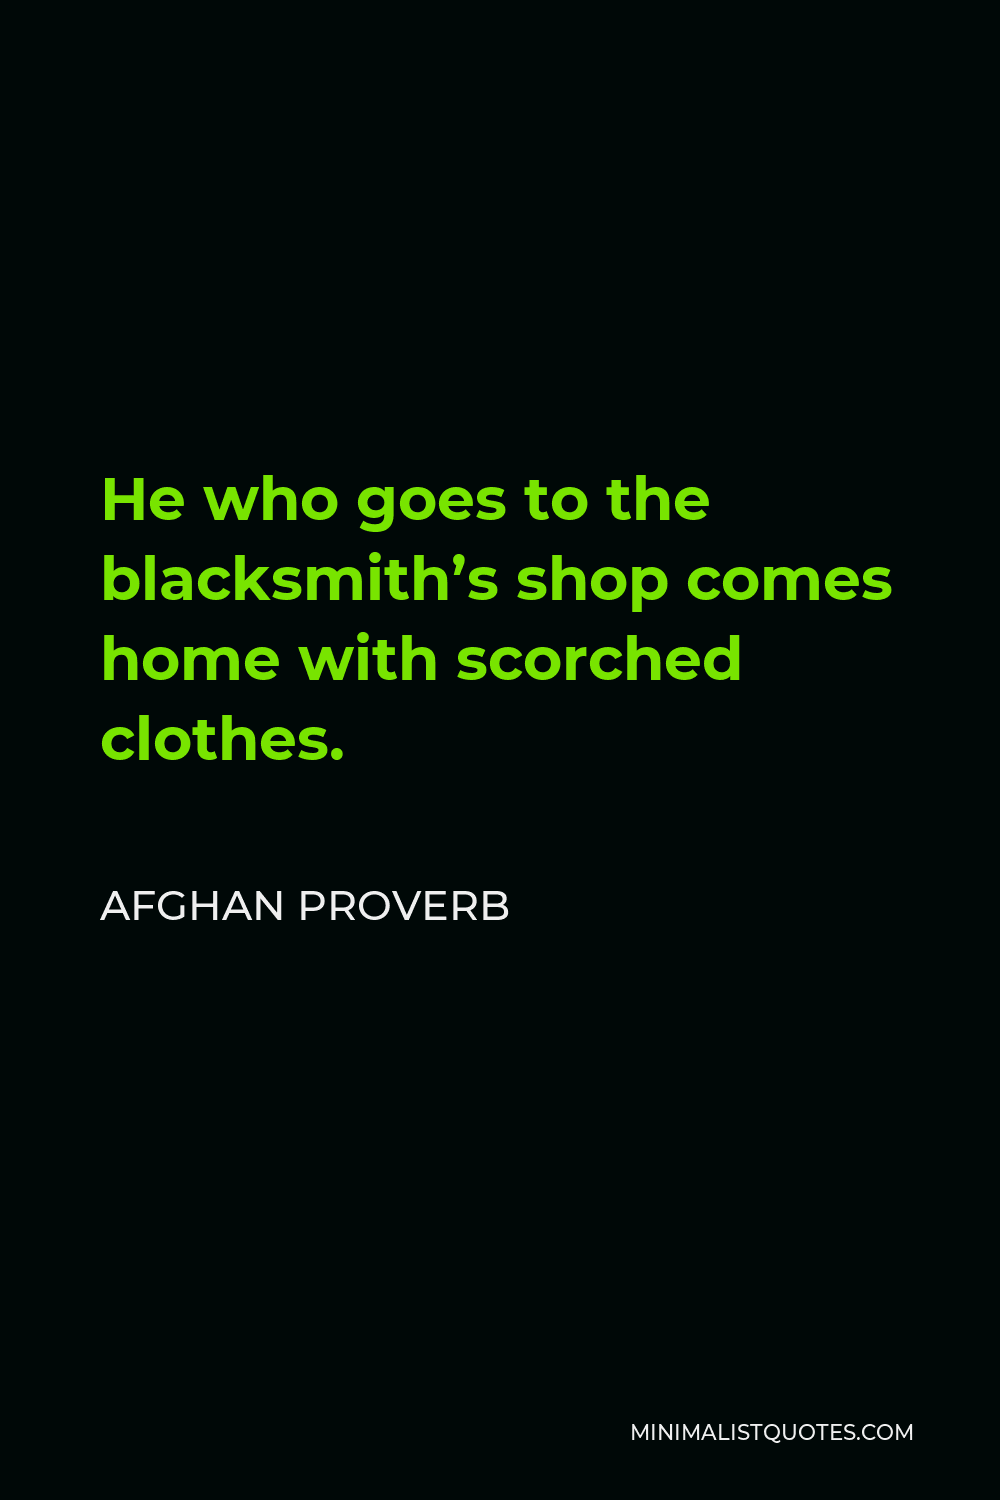 Afghan Proverb Quote - He who goes to the blacksmith’s shop comes home with scorched clothes.